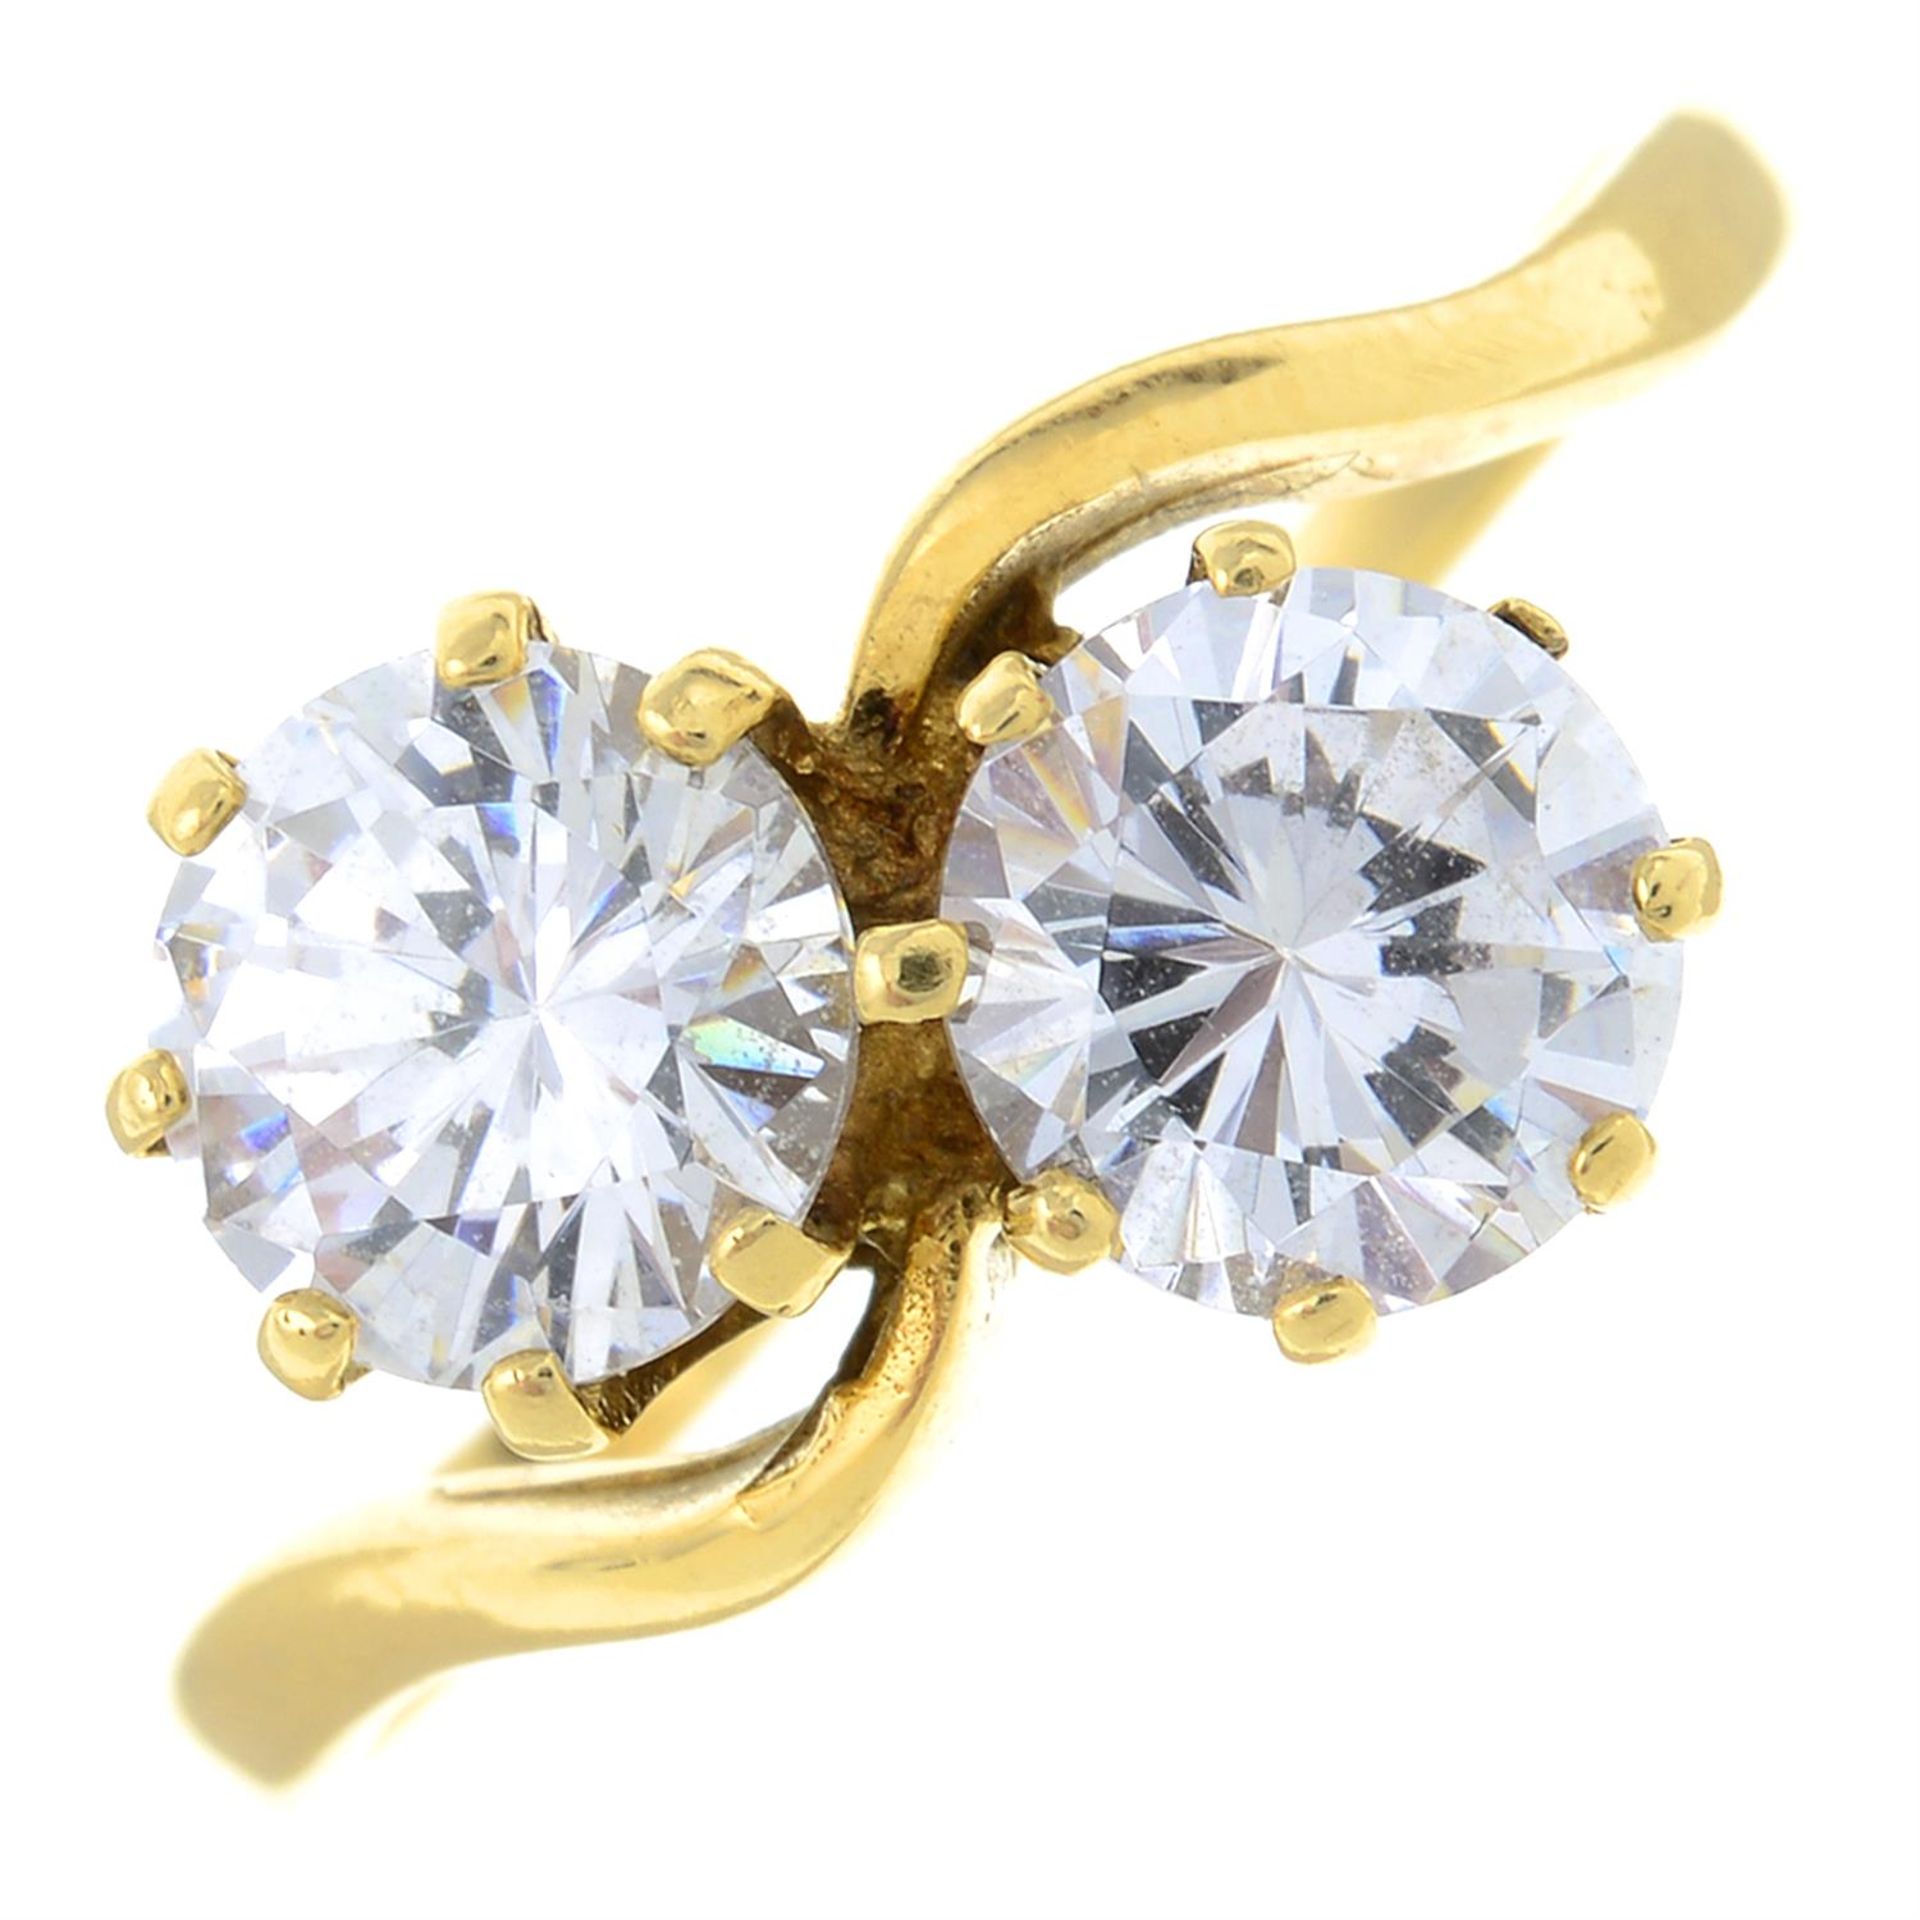 An 18ct gold cubic zirconia two-stone ring.